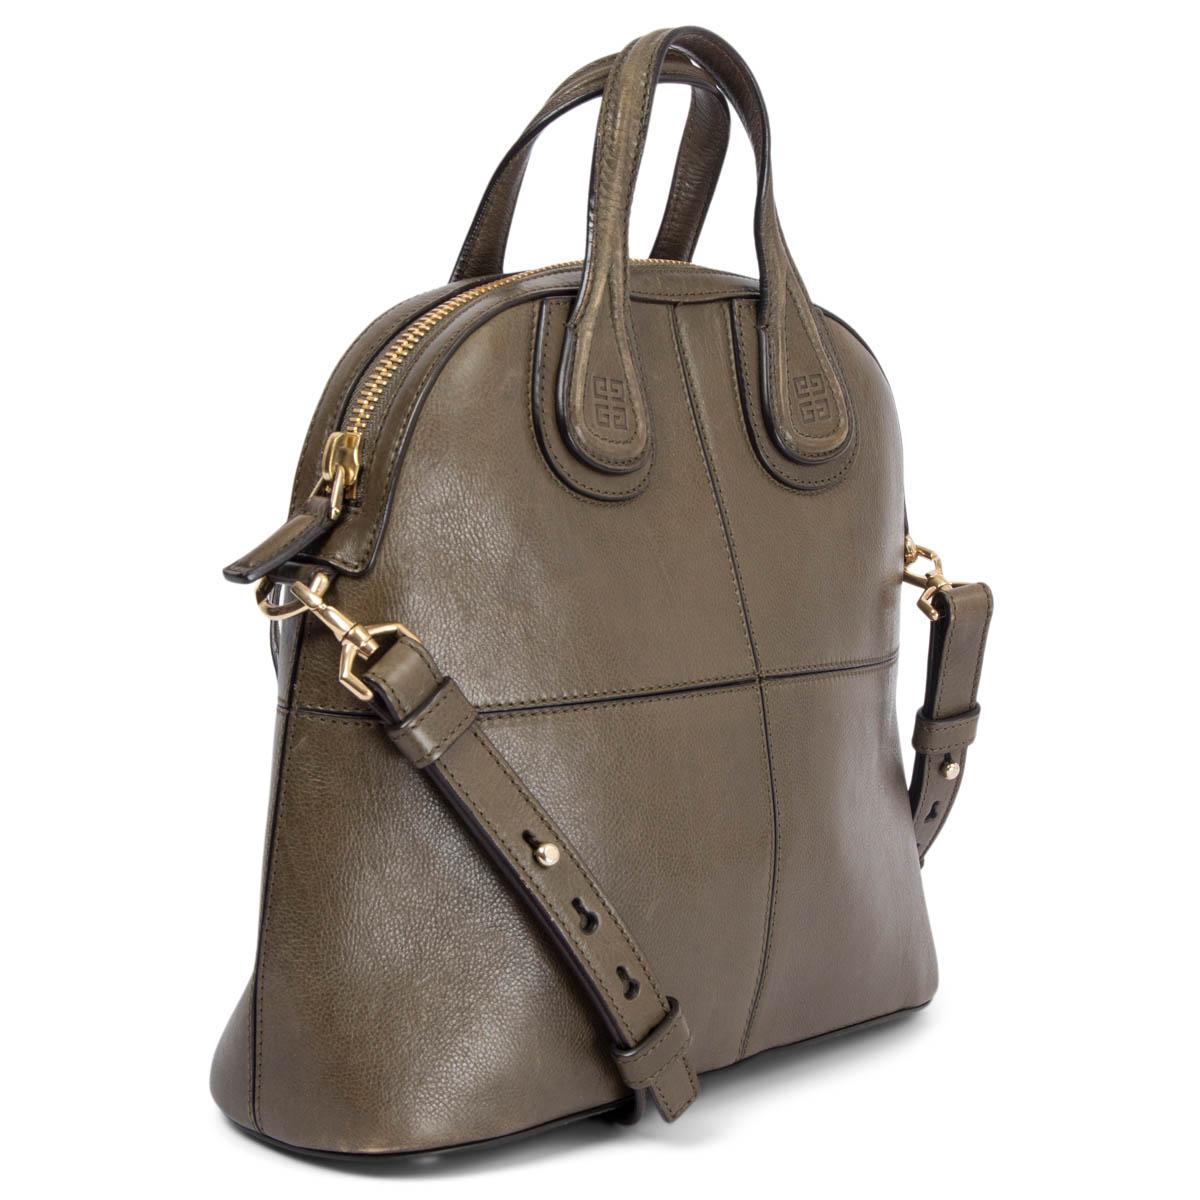 100% authentic Givenchy Nightingale top handle shoulder bag in khaki green calfskin with light gold-tone hardware. Opens with a zipper on top and is lined in black canvas with one zipper pocket against the back and a small open pocket against the